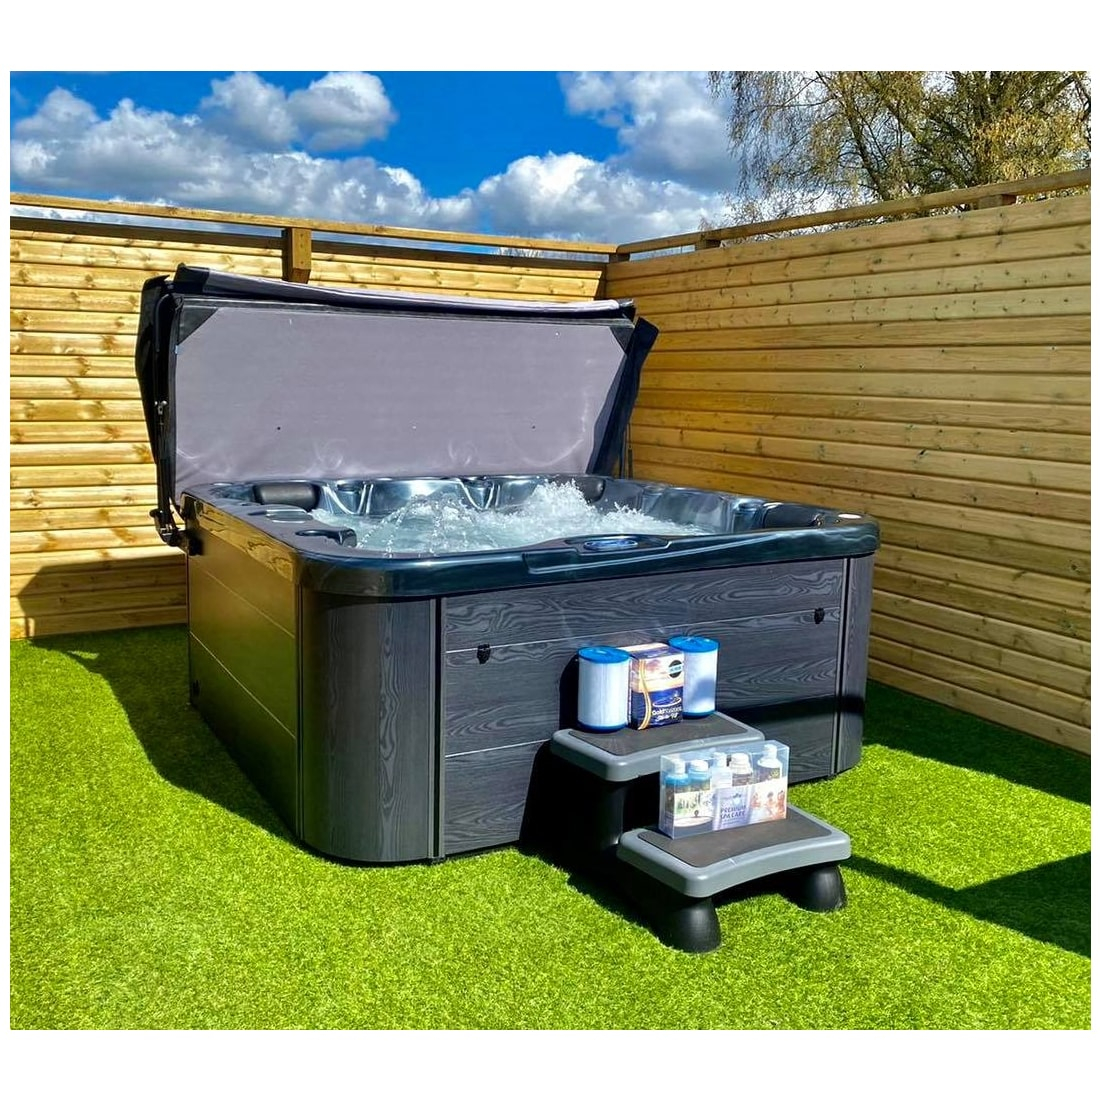 When Are Hot Tubs The Cheapest?